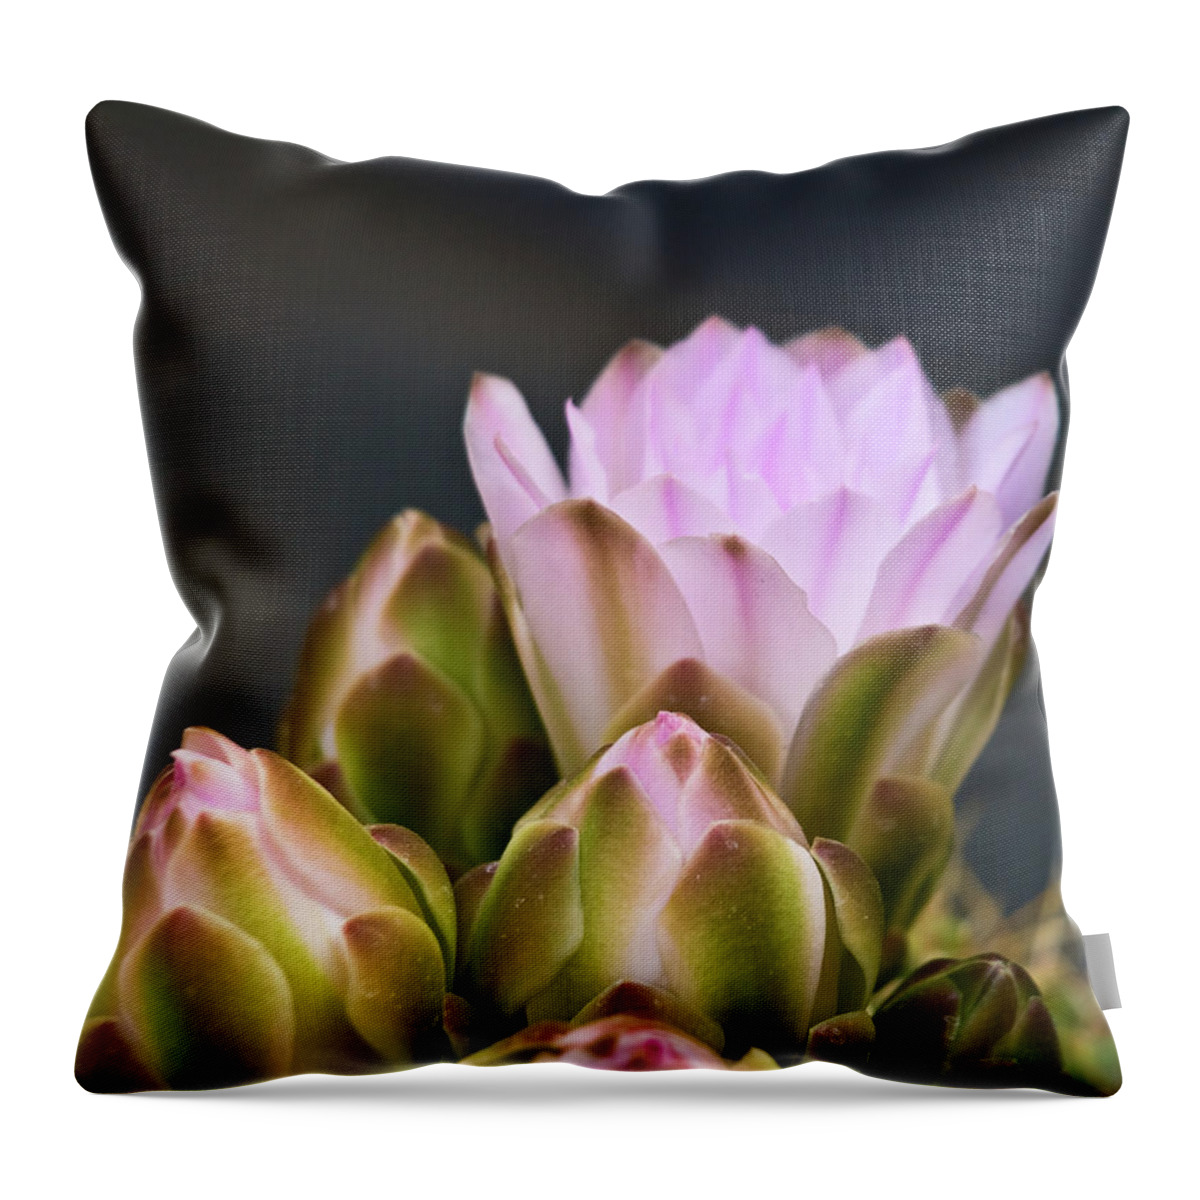 Sicily Throw Pillow featuring the photograph Pink Cactus Flowers by Andrea Rapisarda Photography